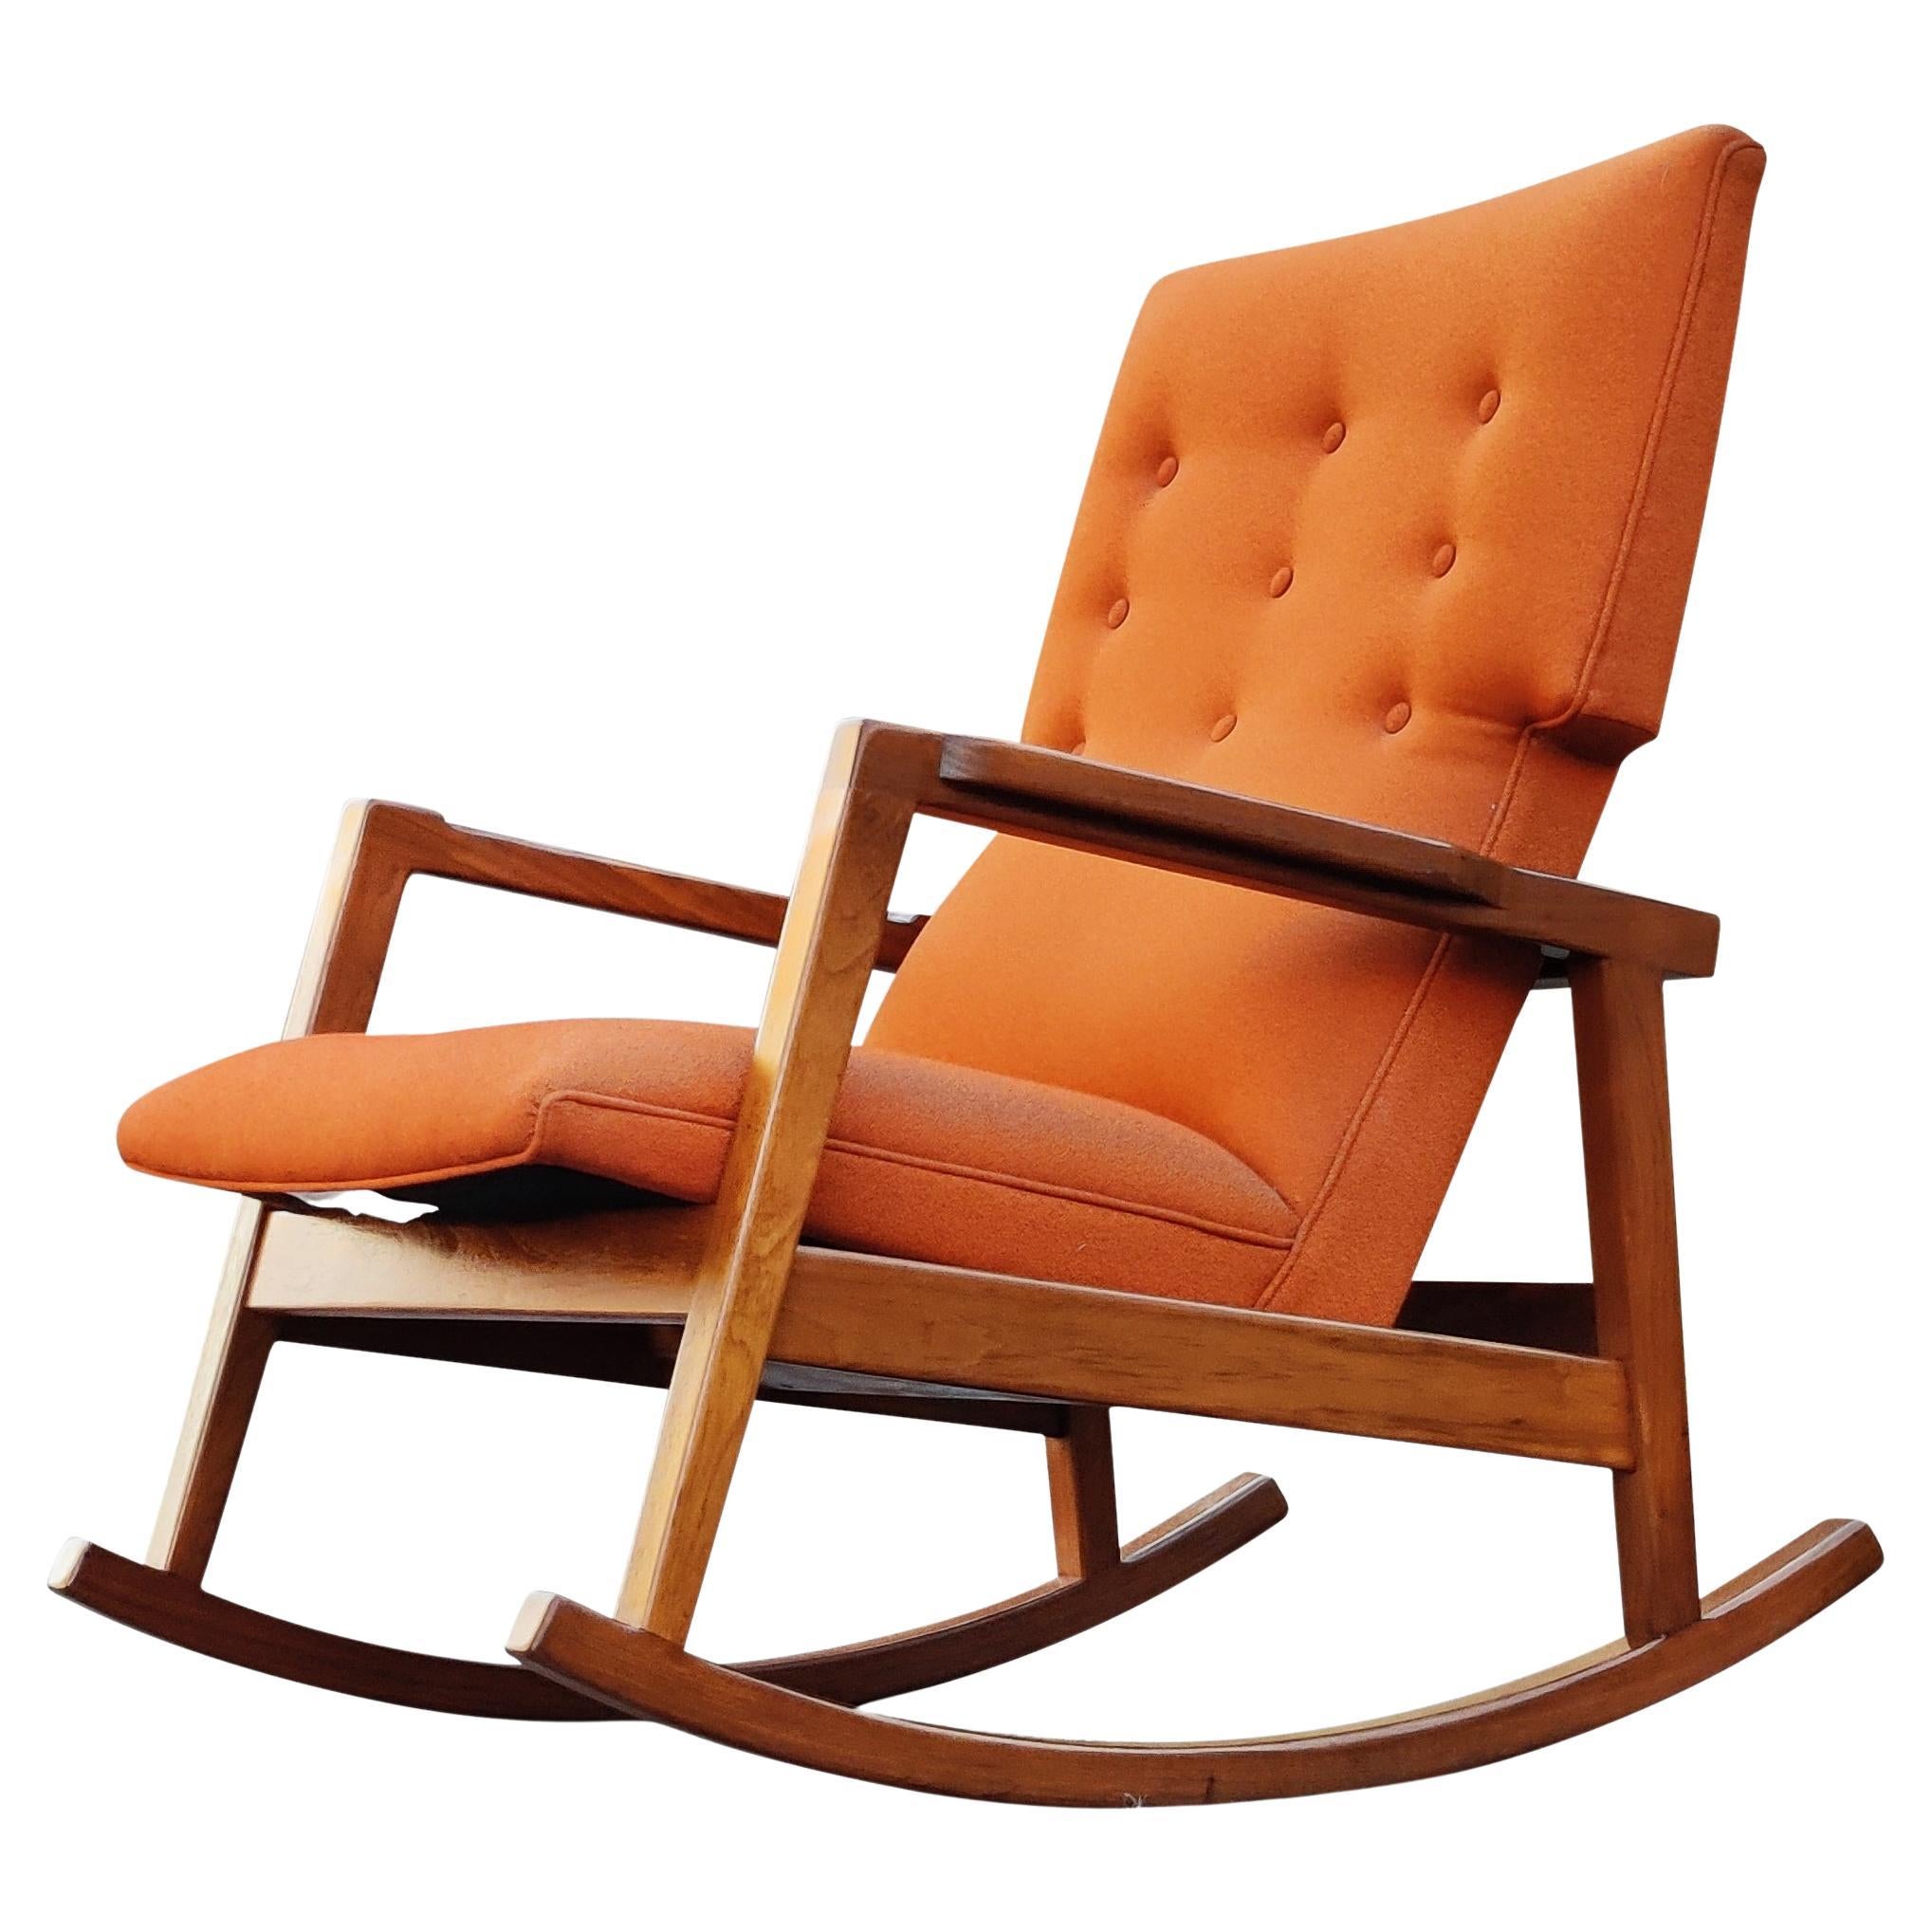 Walnut and Persimmon Ducale Wool Fabric Rocking Chair by Design within Reach MCM For Sale